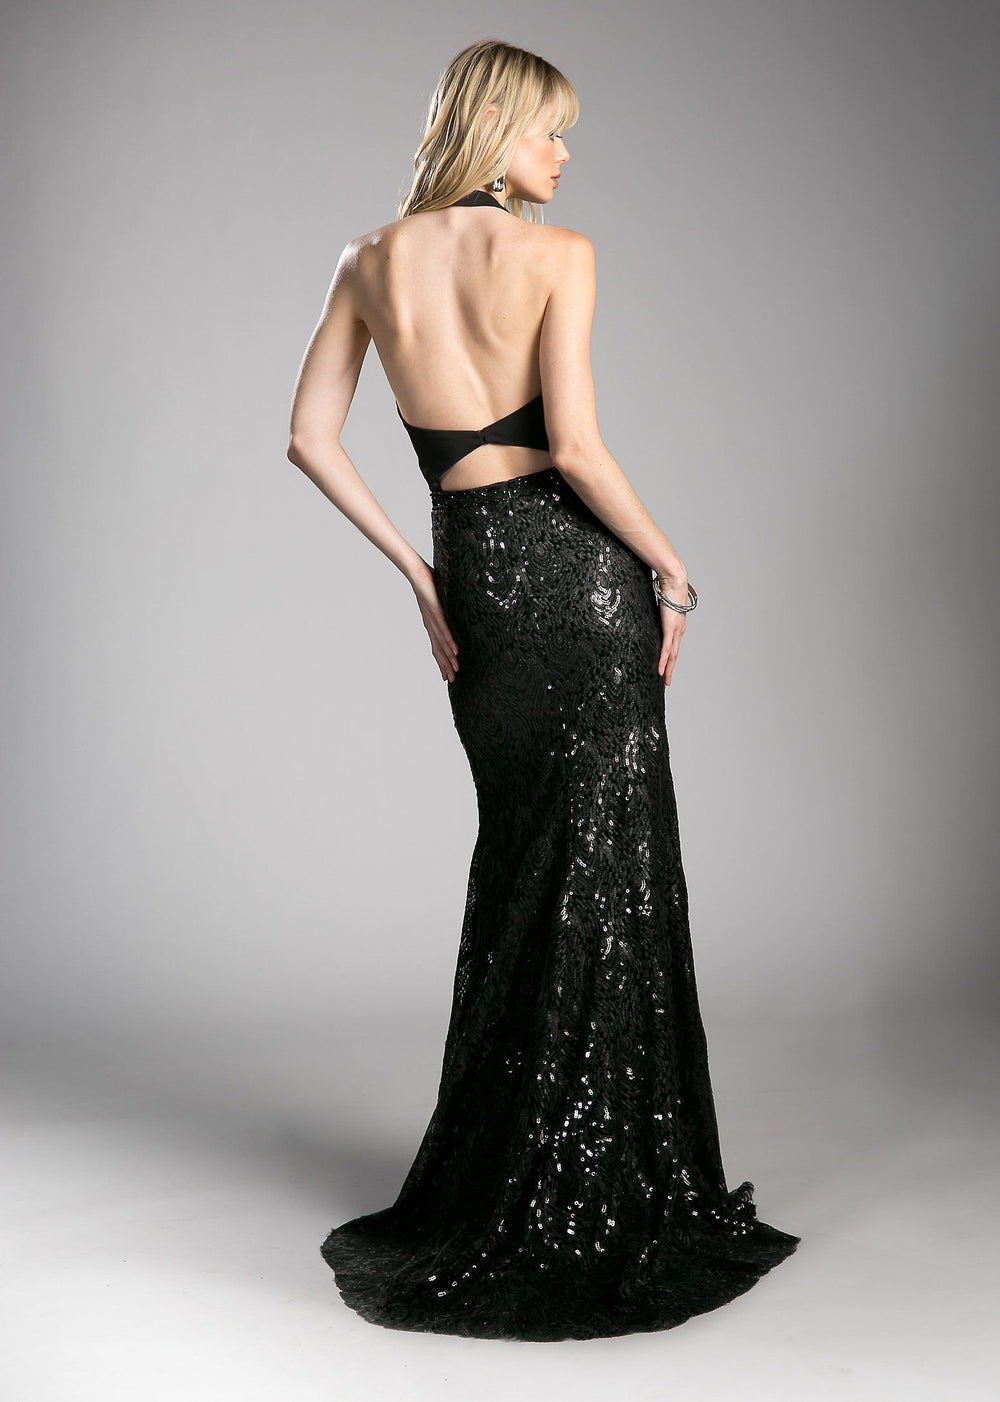 Long Black Halter Dress with Sequined Skirt by Cinderella Divine 62495-Long Formal Dresses-ABC Fashion